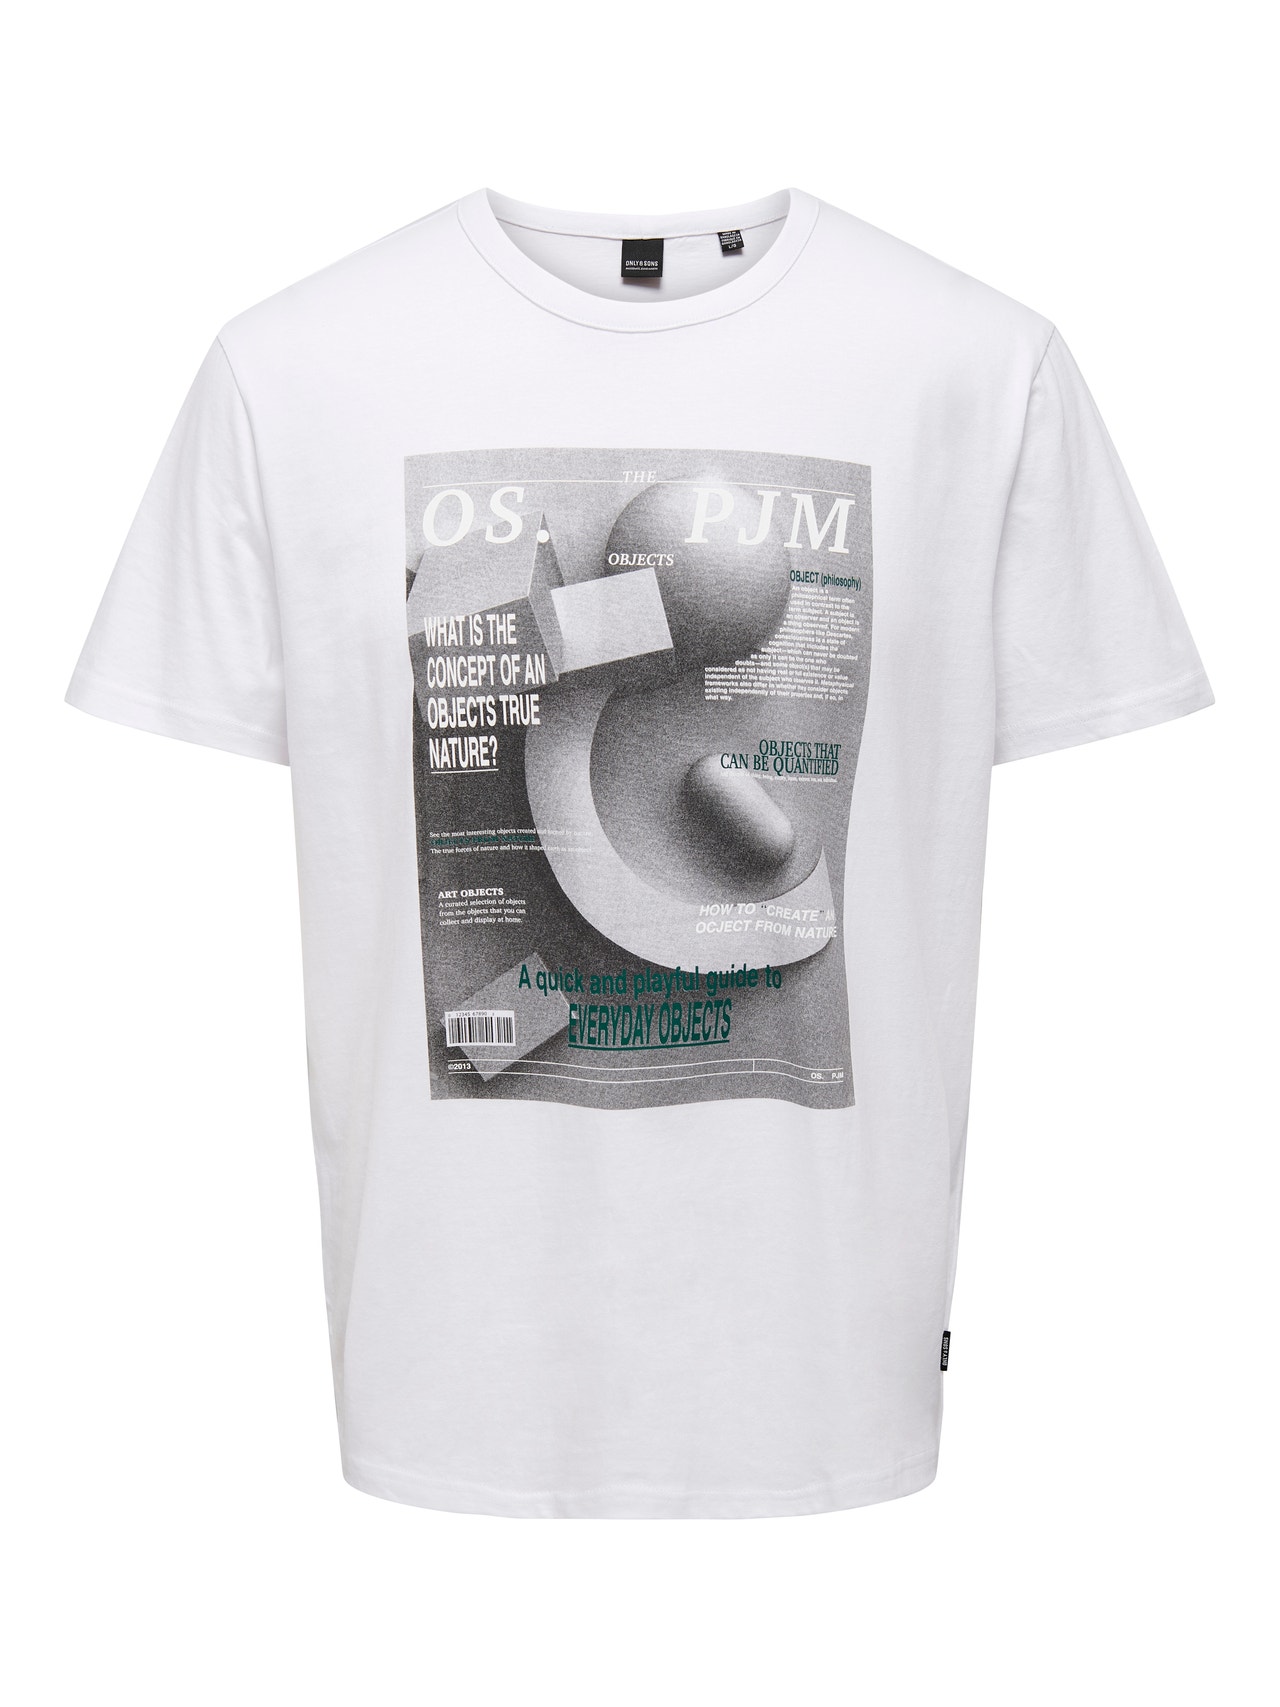 ONLY & SONS Regular Fit Round Neck T-Shirt -Bright White - 22026378